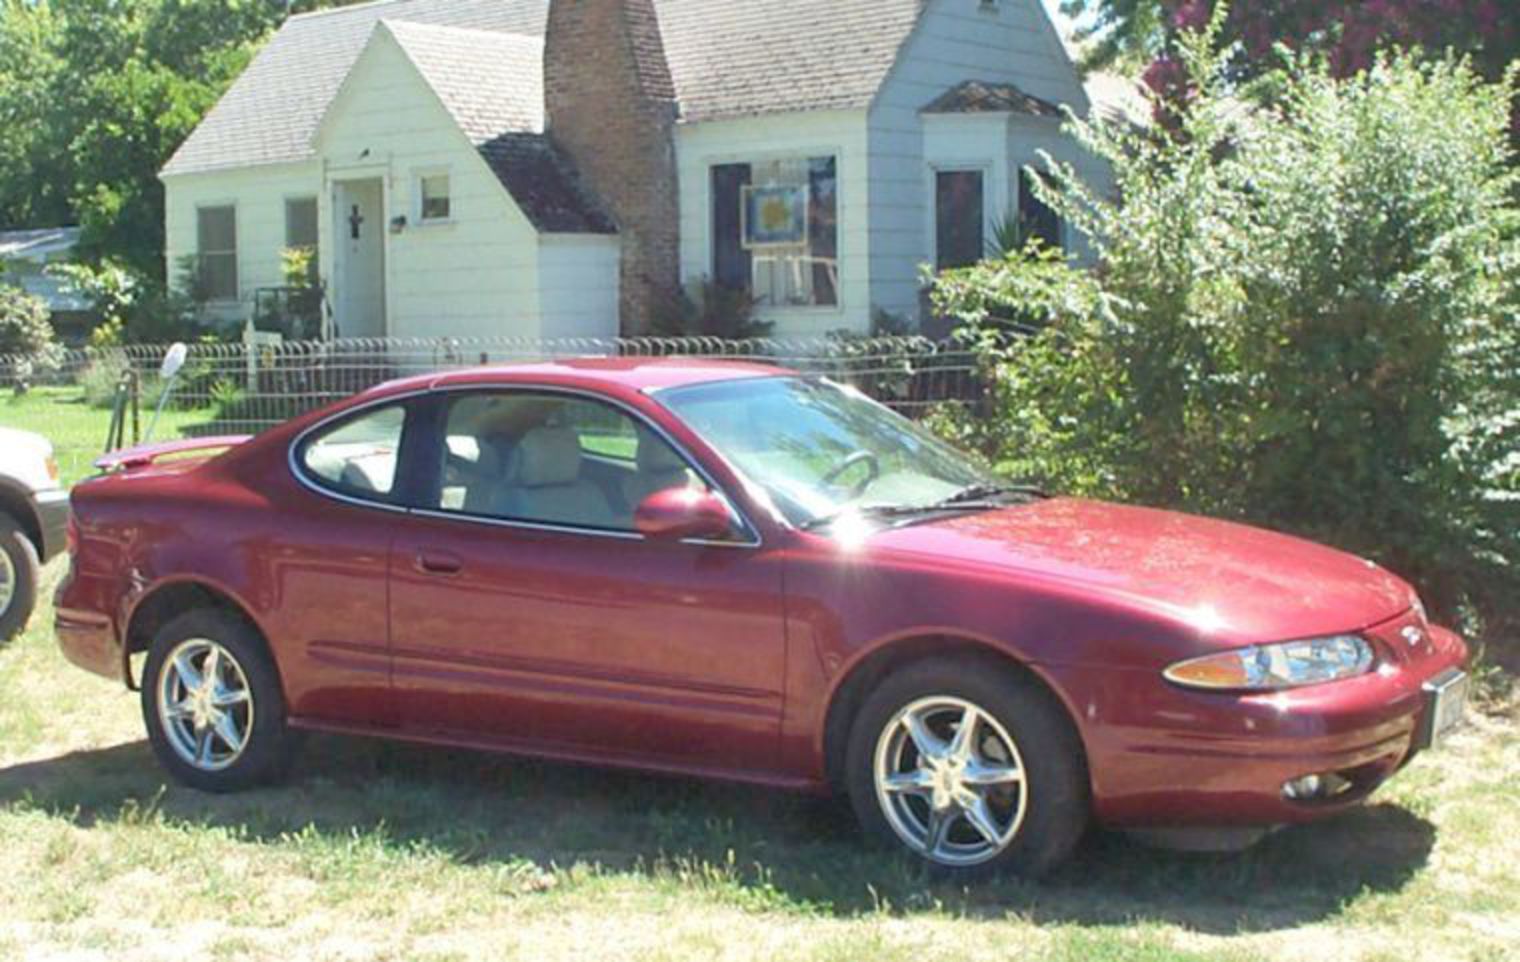 2000 Oldsmobile Alero Car Picture | Old Car and New Car Pictures